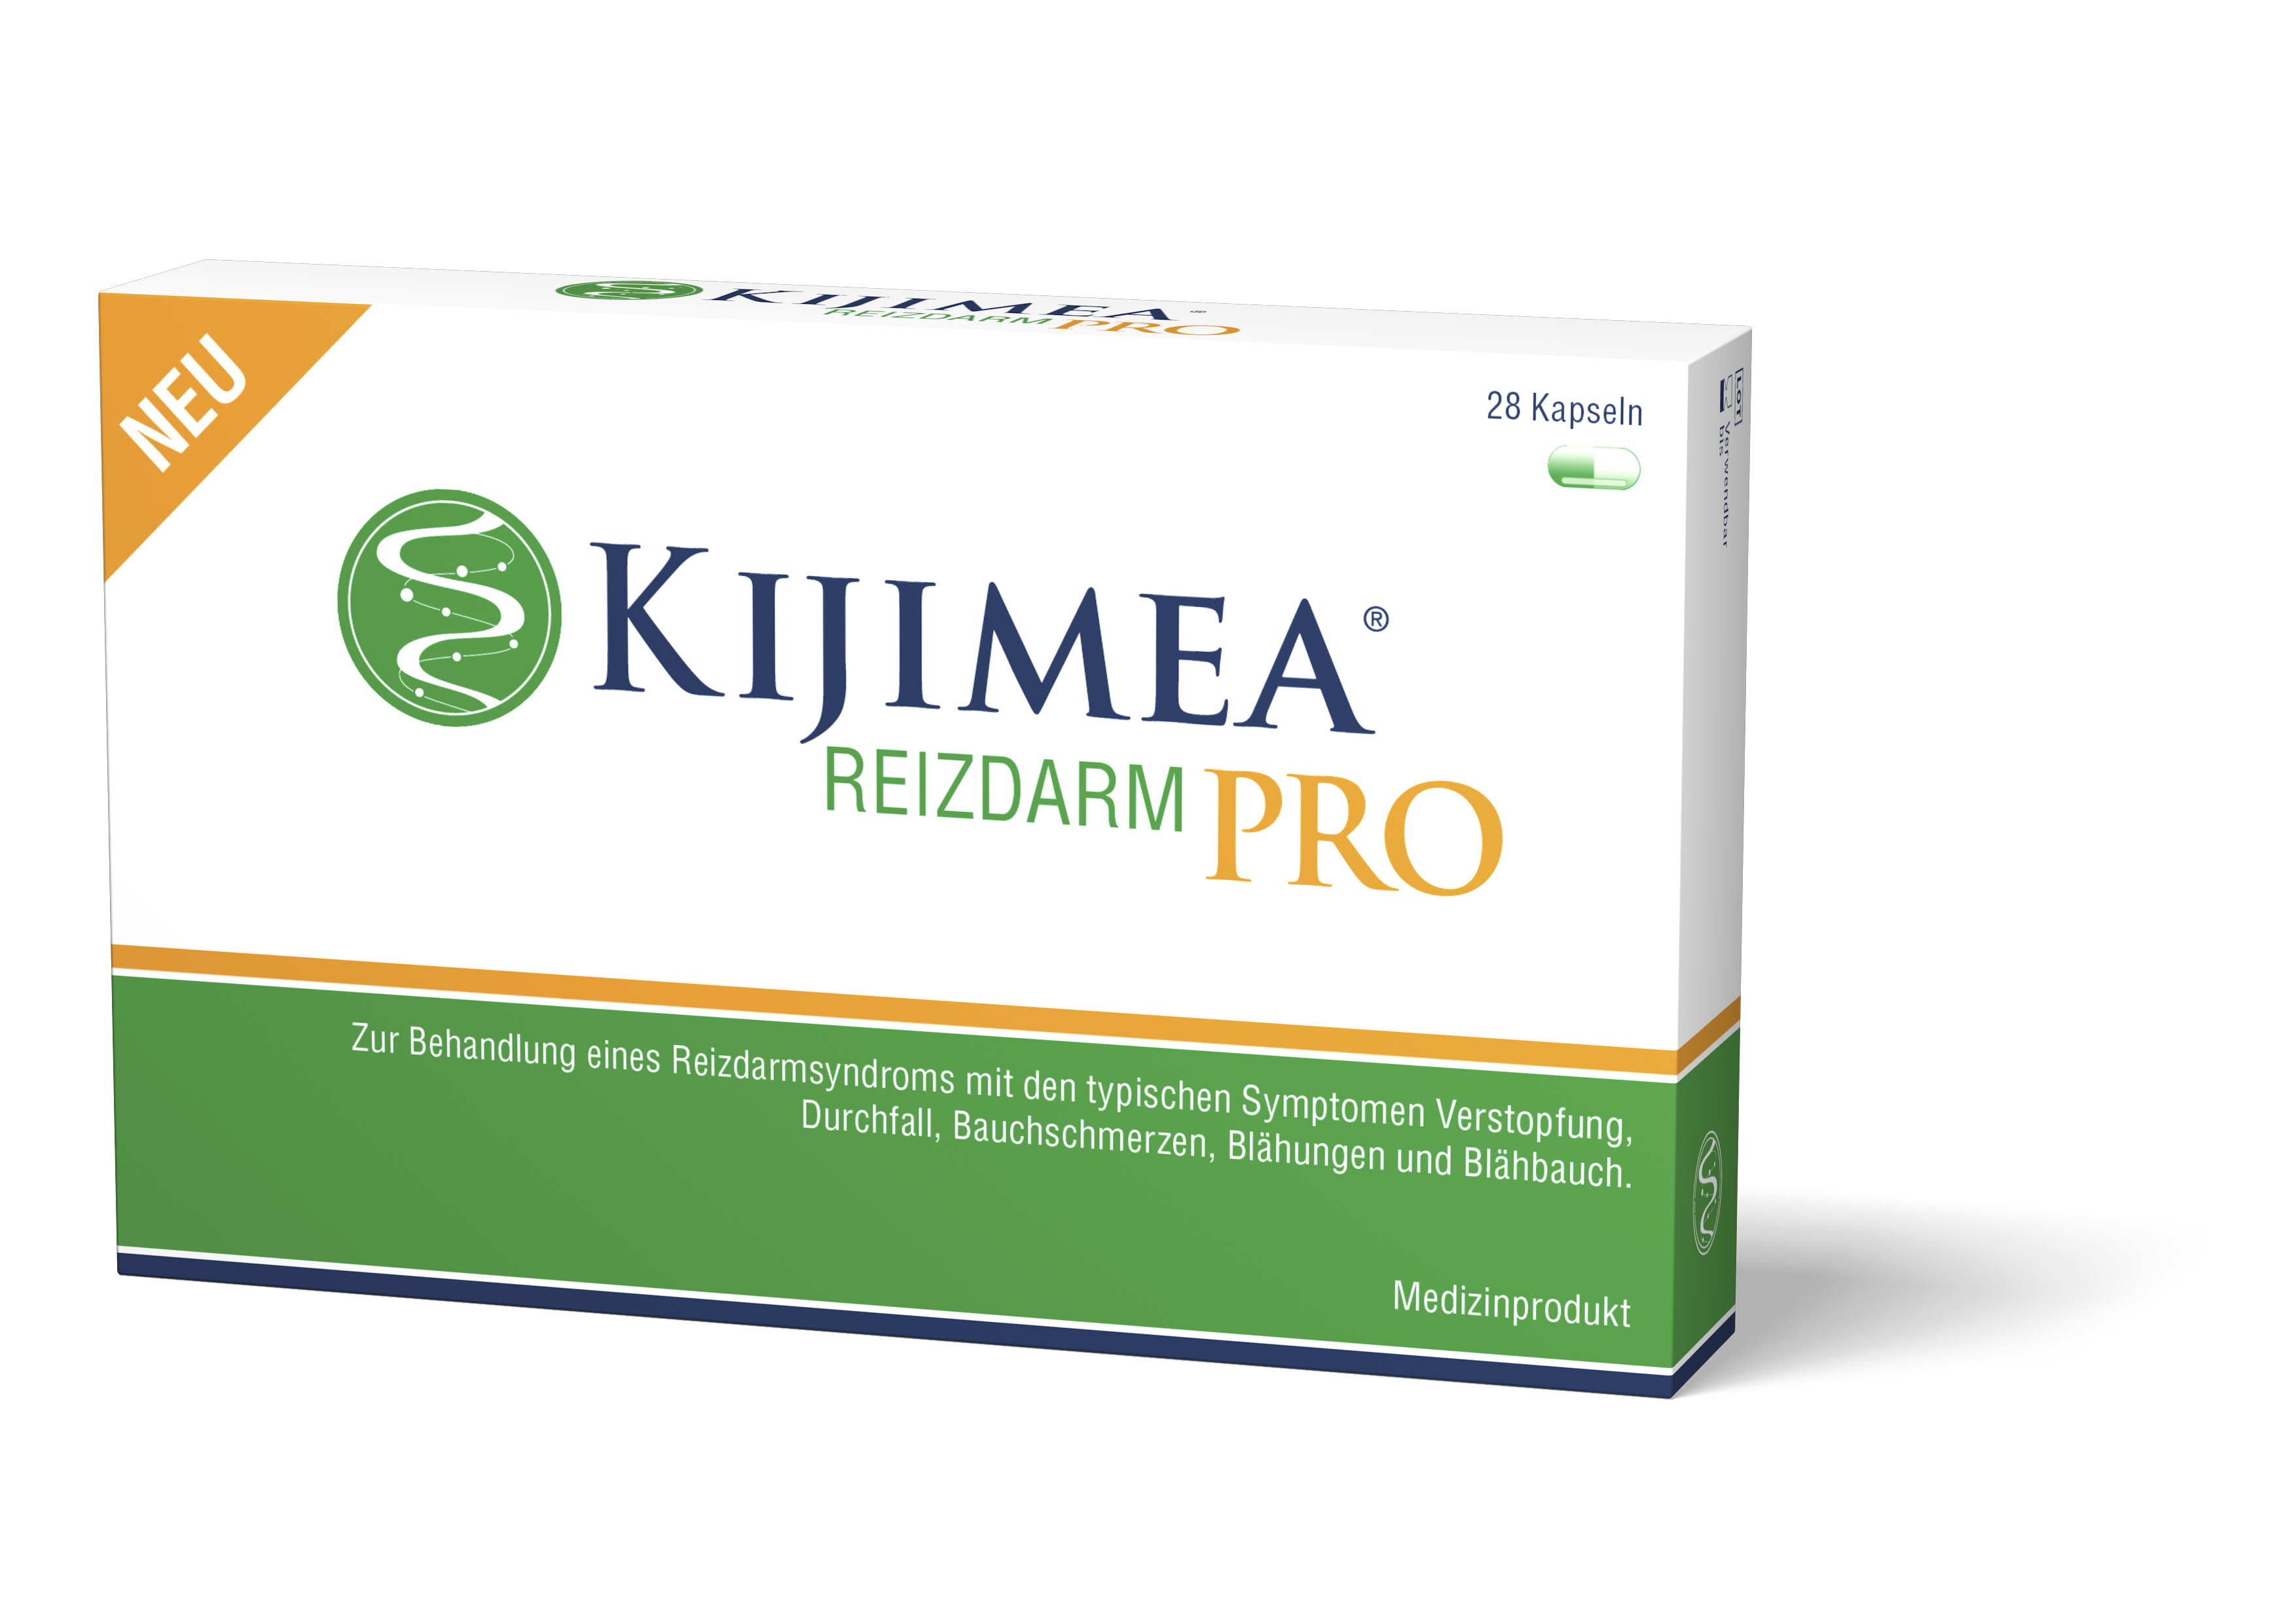 Kijimea™ IBS, Medical Food for The Dietary Management of Irritable Bowel  Syndrome 56 Capsules